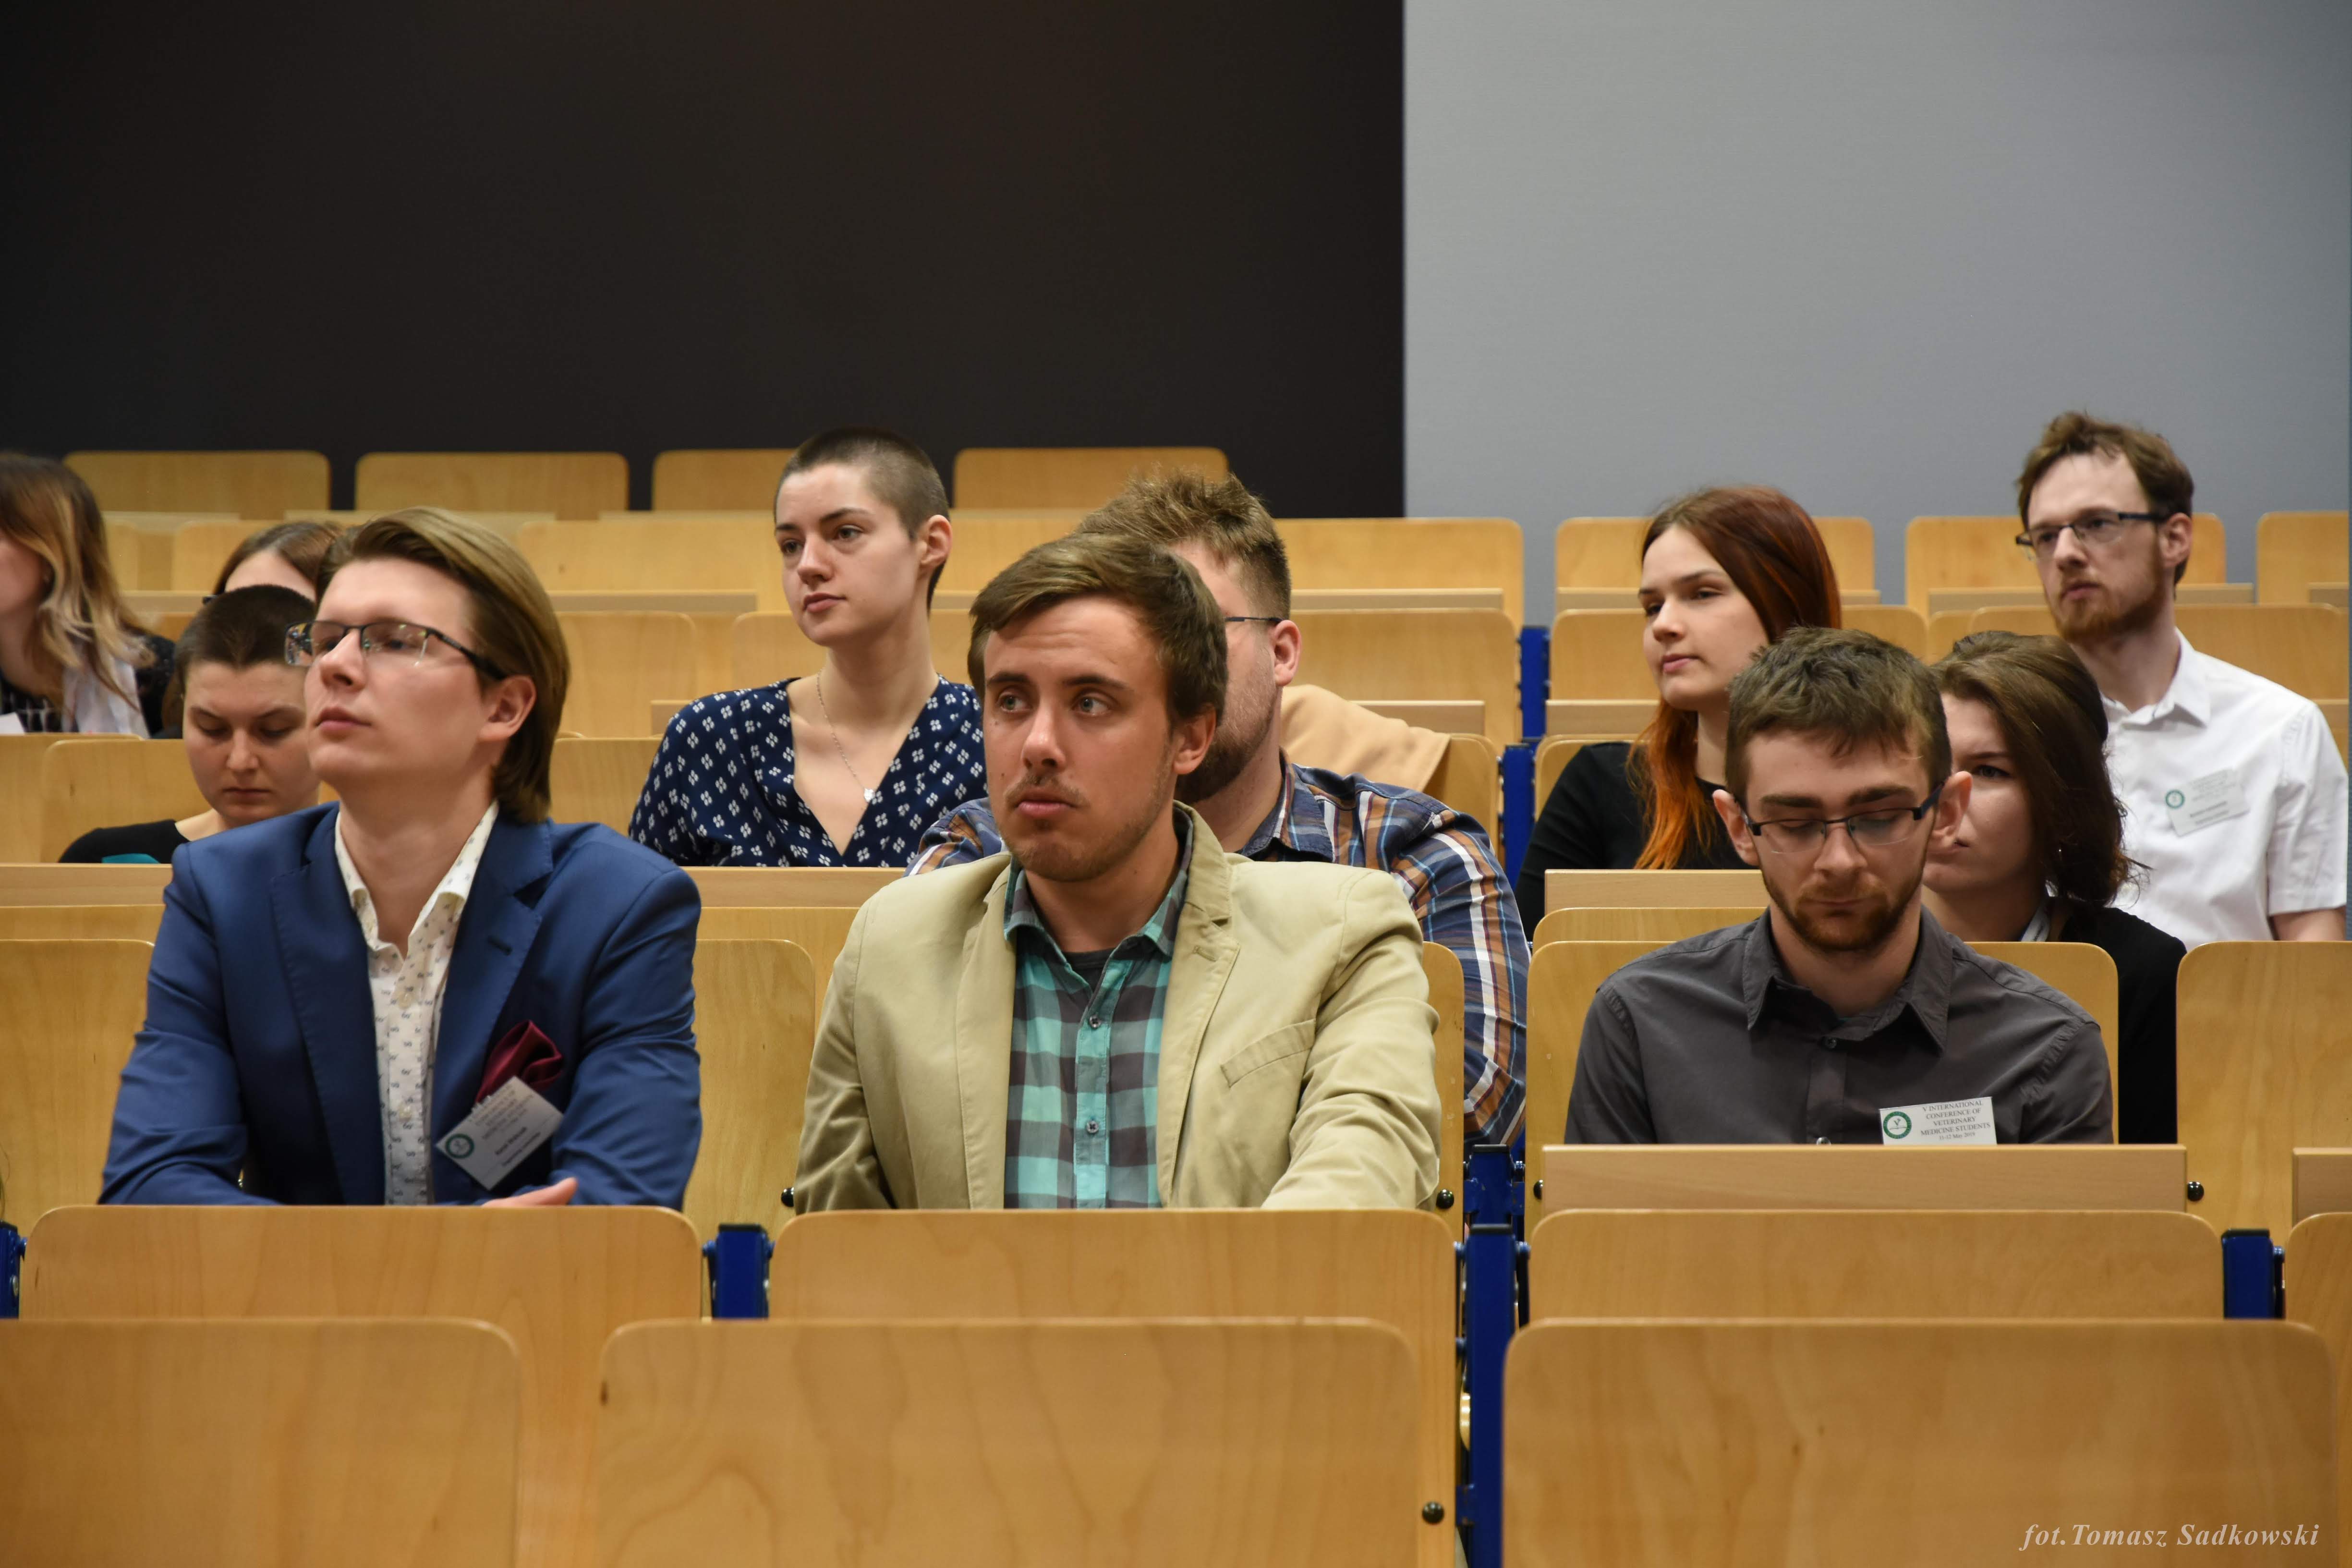 audience during dr. Louton's lecture